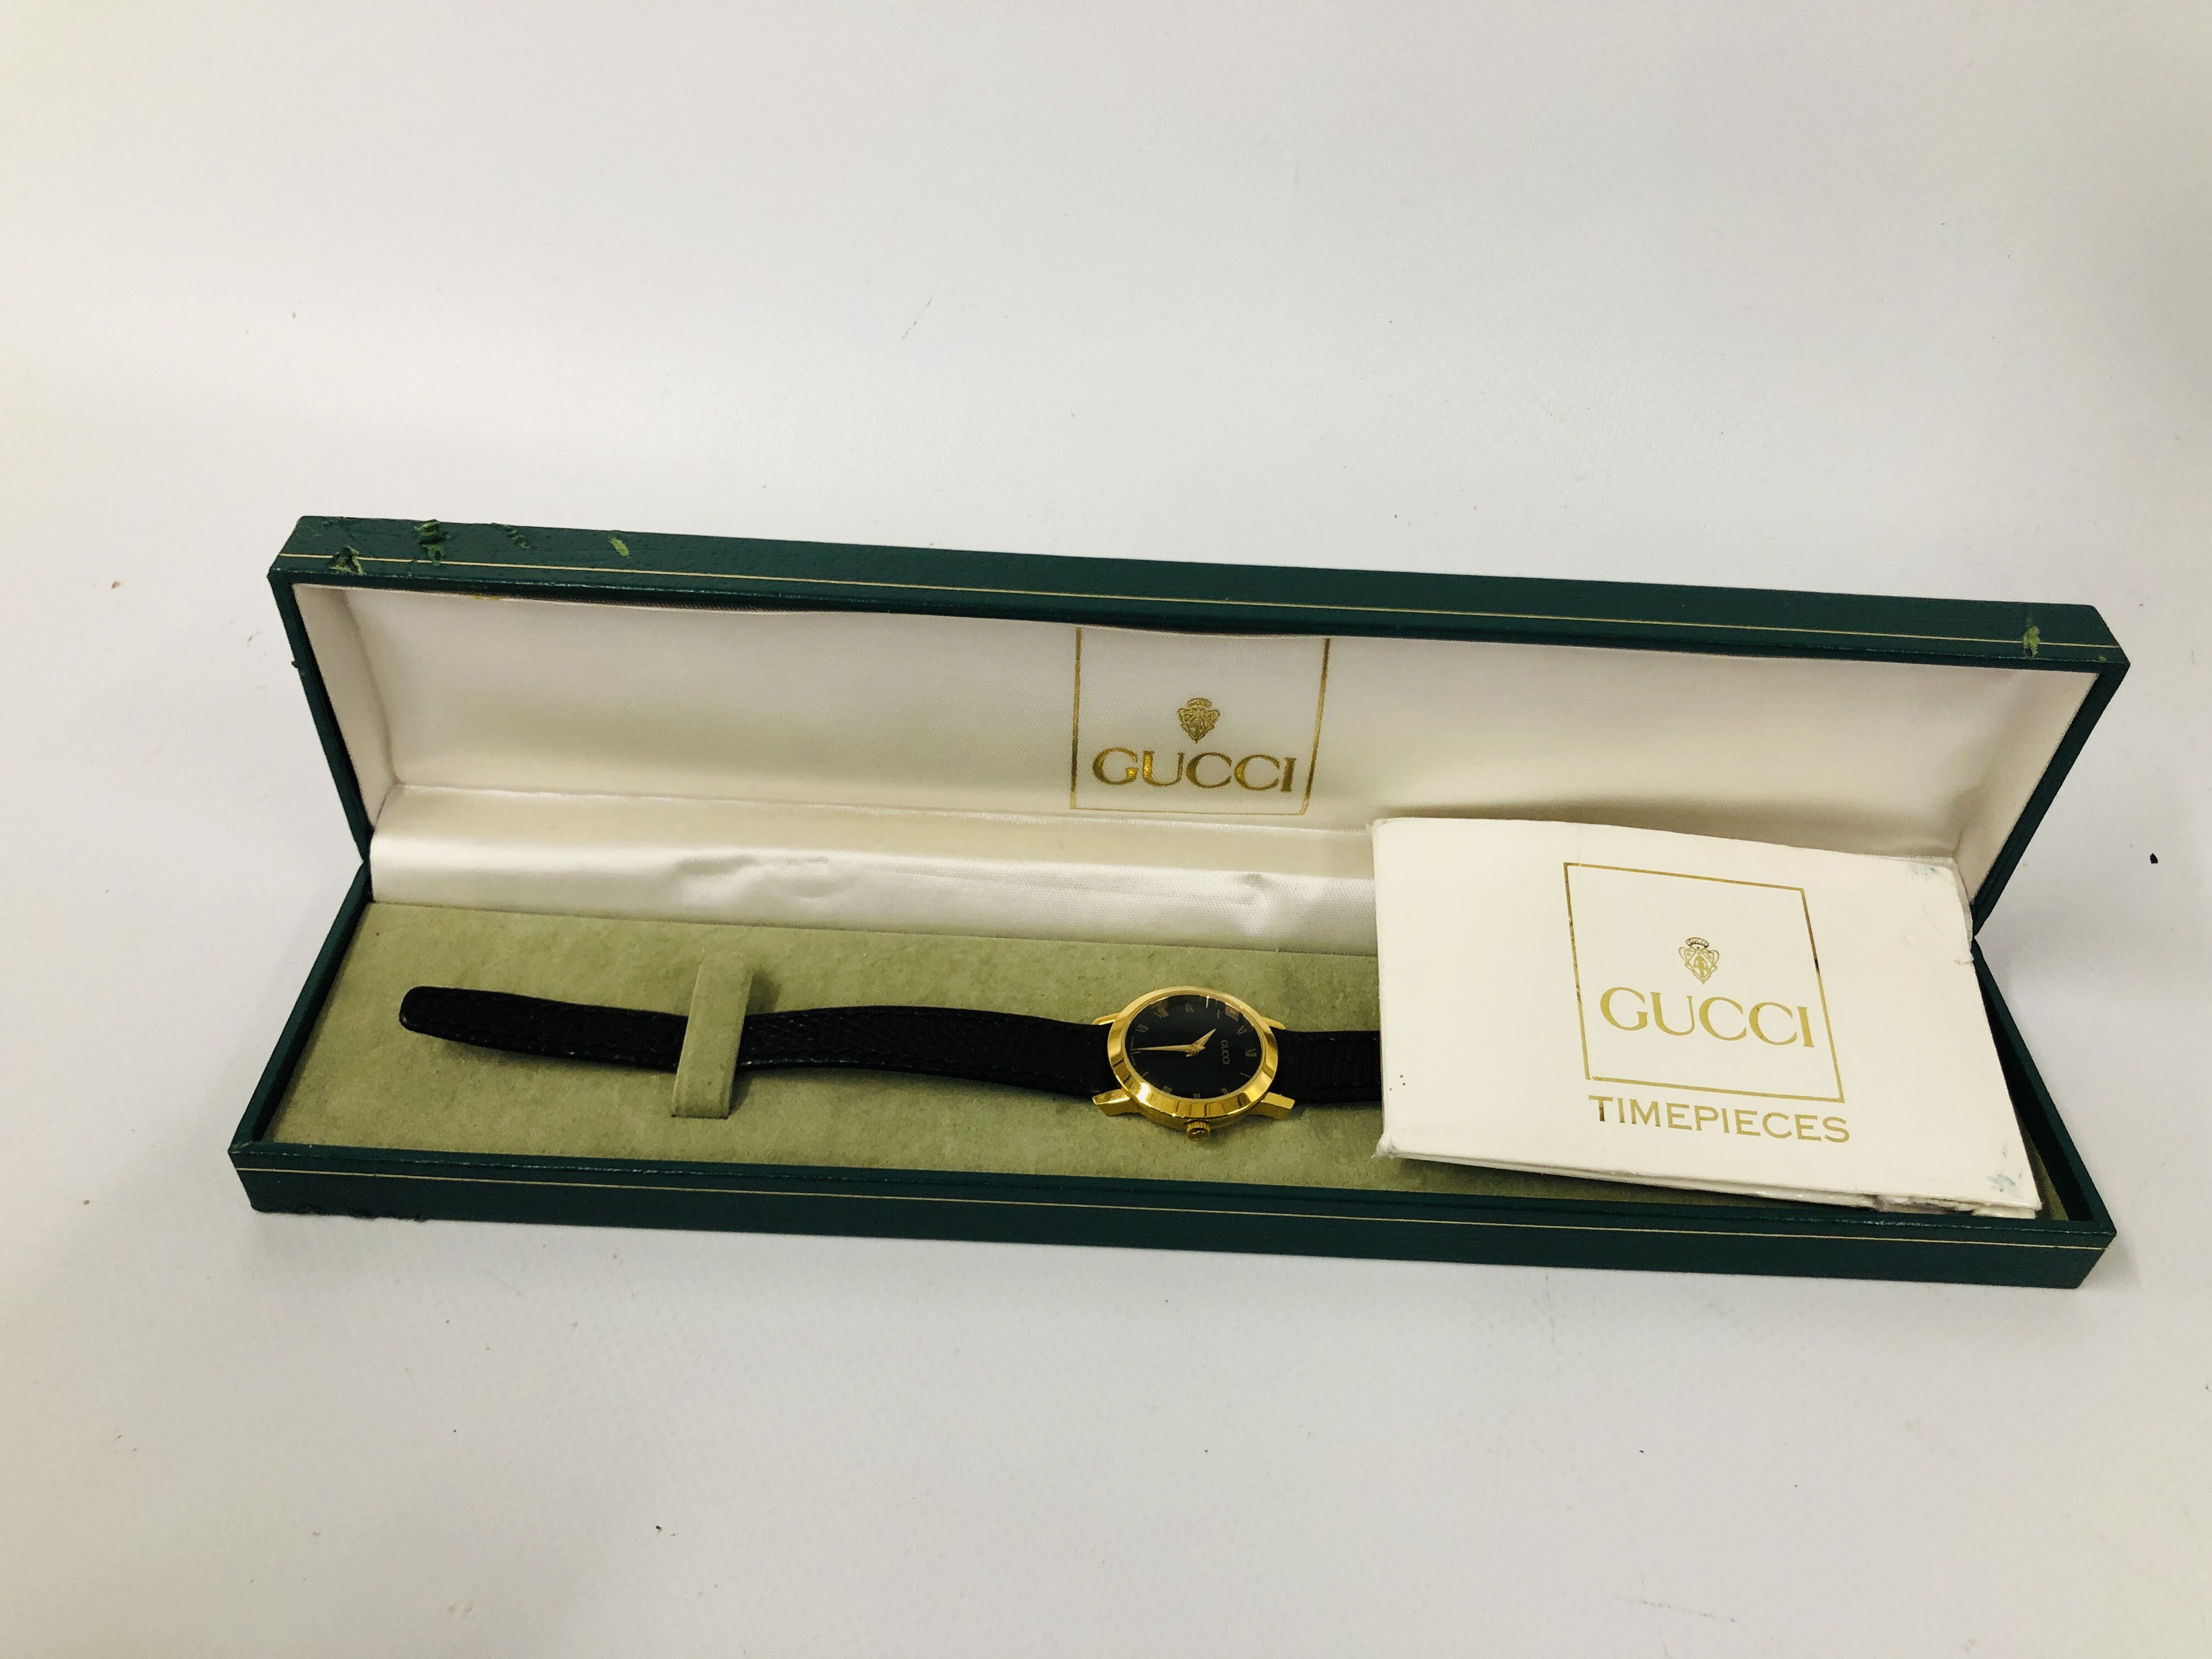 LADIES WRIST WATCH MARKED GUCCI MODEL NO. 2200L SERIAL NO. - Image 14 of 16